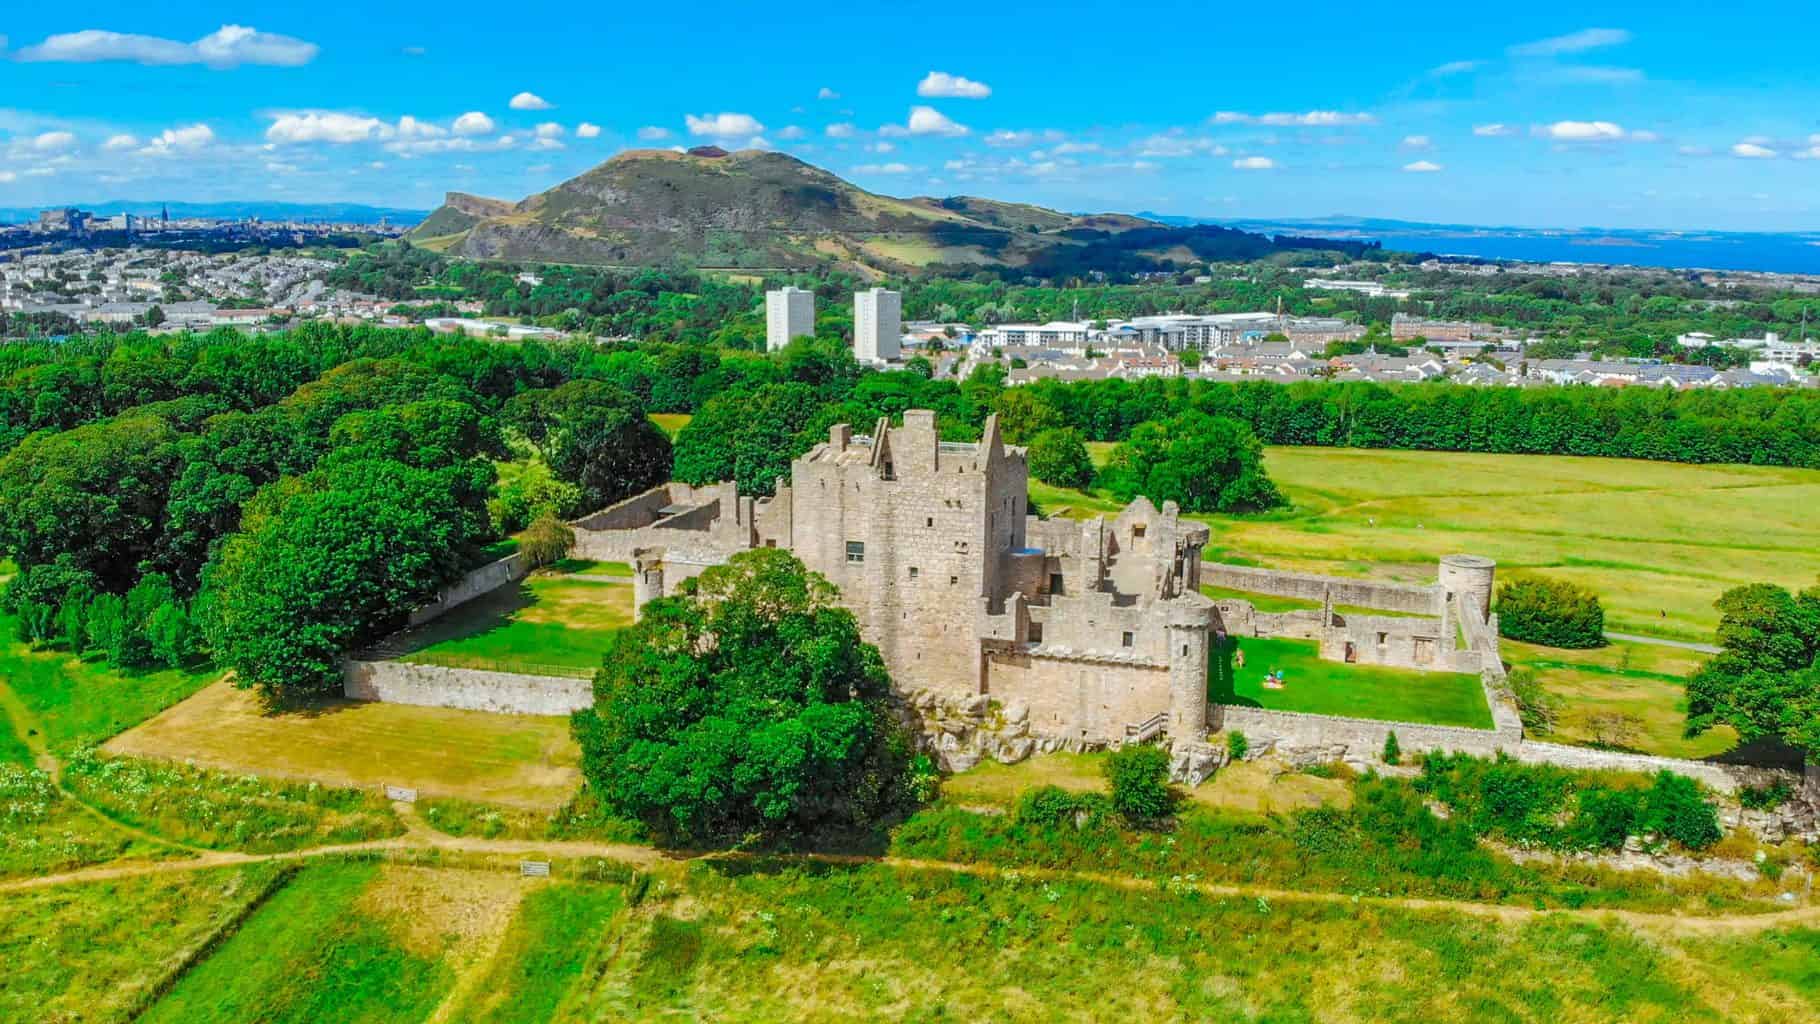 An aerial view of the ruins at Craigmillar Castle and the city of Edinburgh.